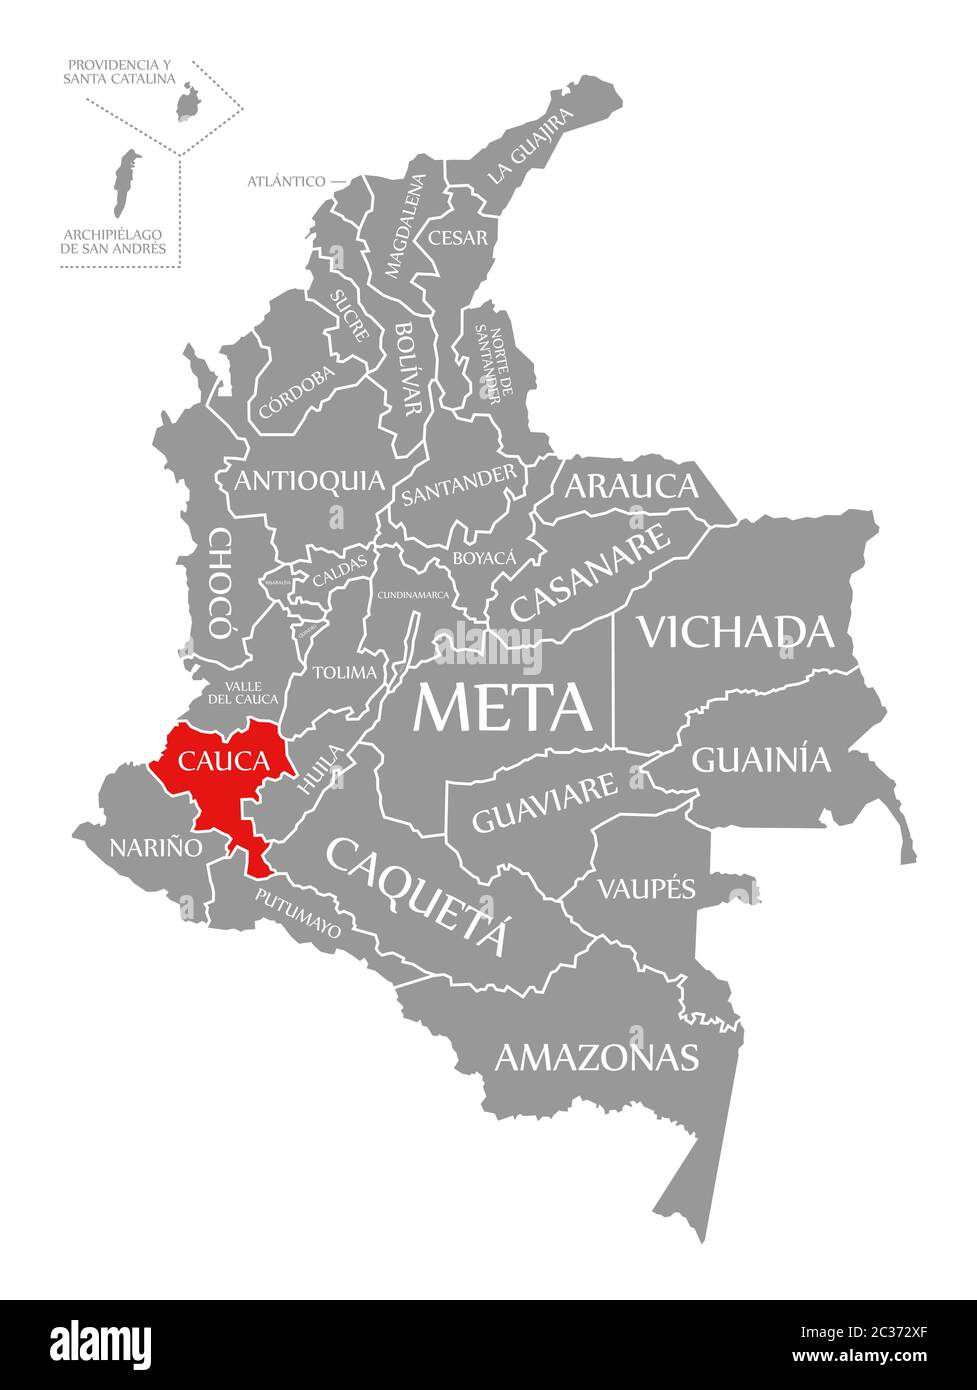 Cauca red highlighted in map of Colombia Stock Photo